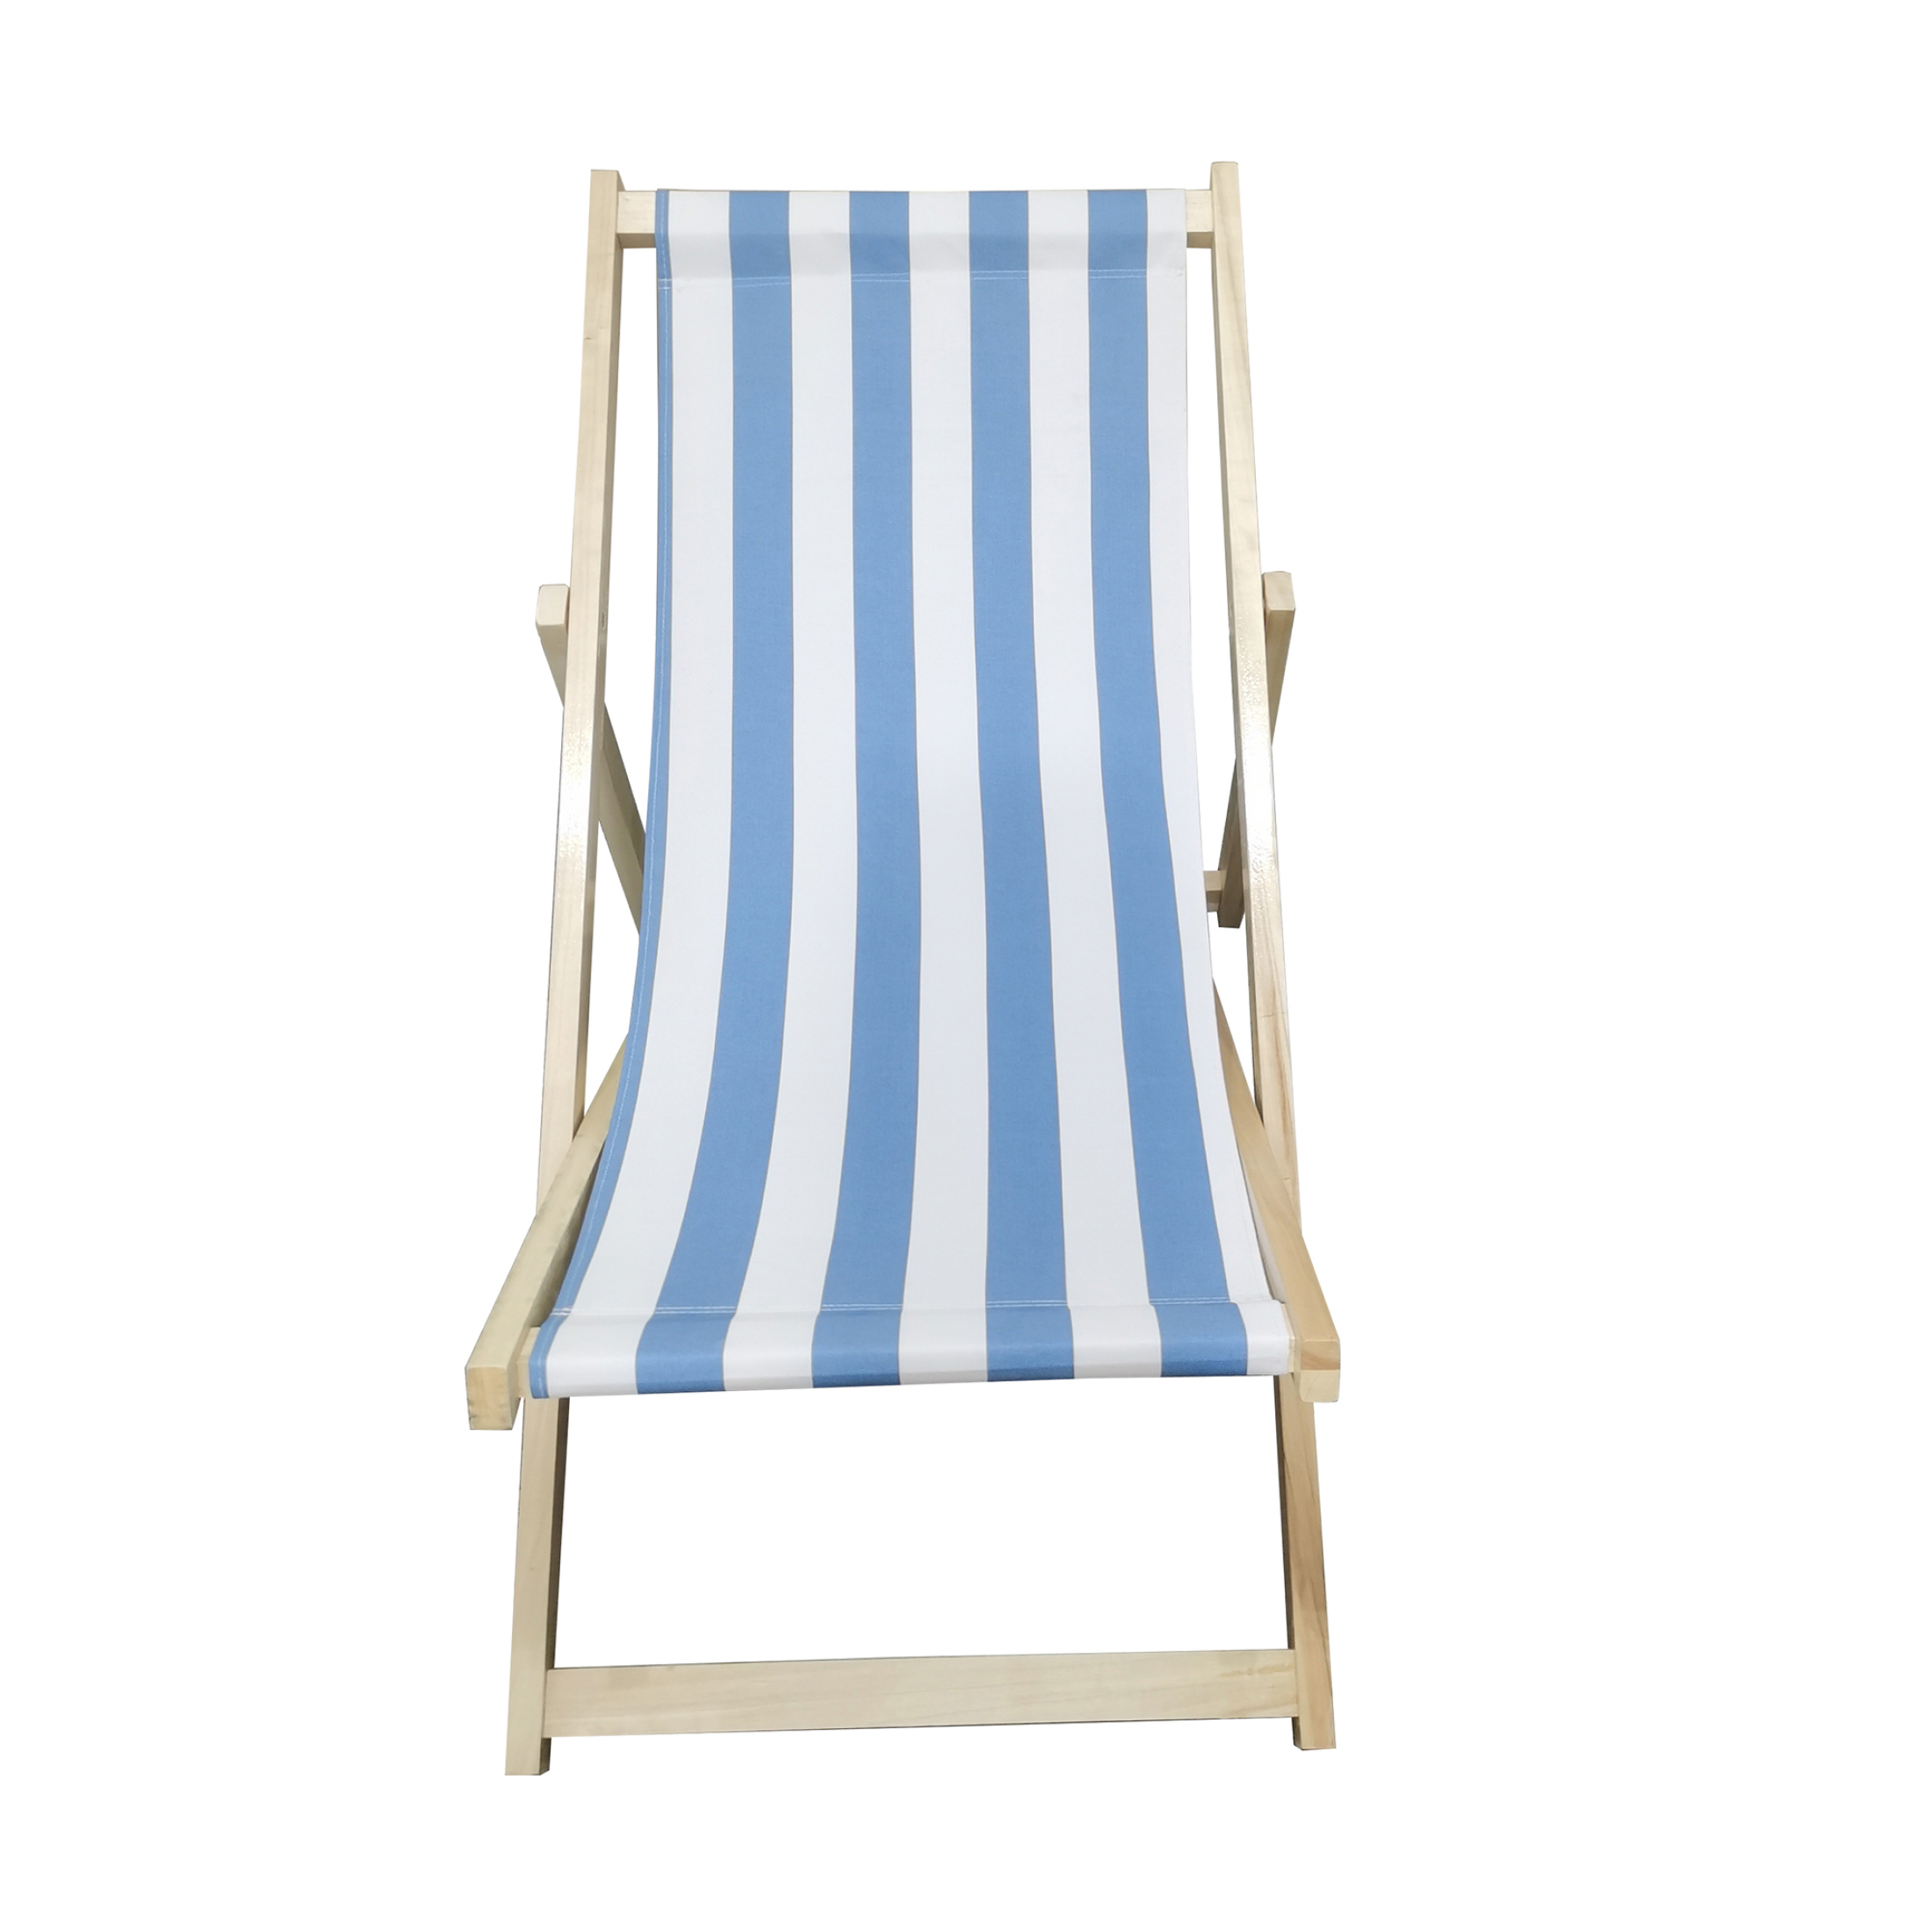 Pouseayar Foldable Sling Chair,Outdoor Beach Chair Chaise Lounge, Blue - image 3 of 8